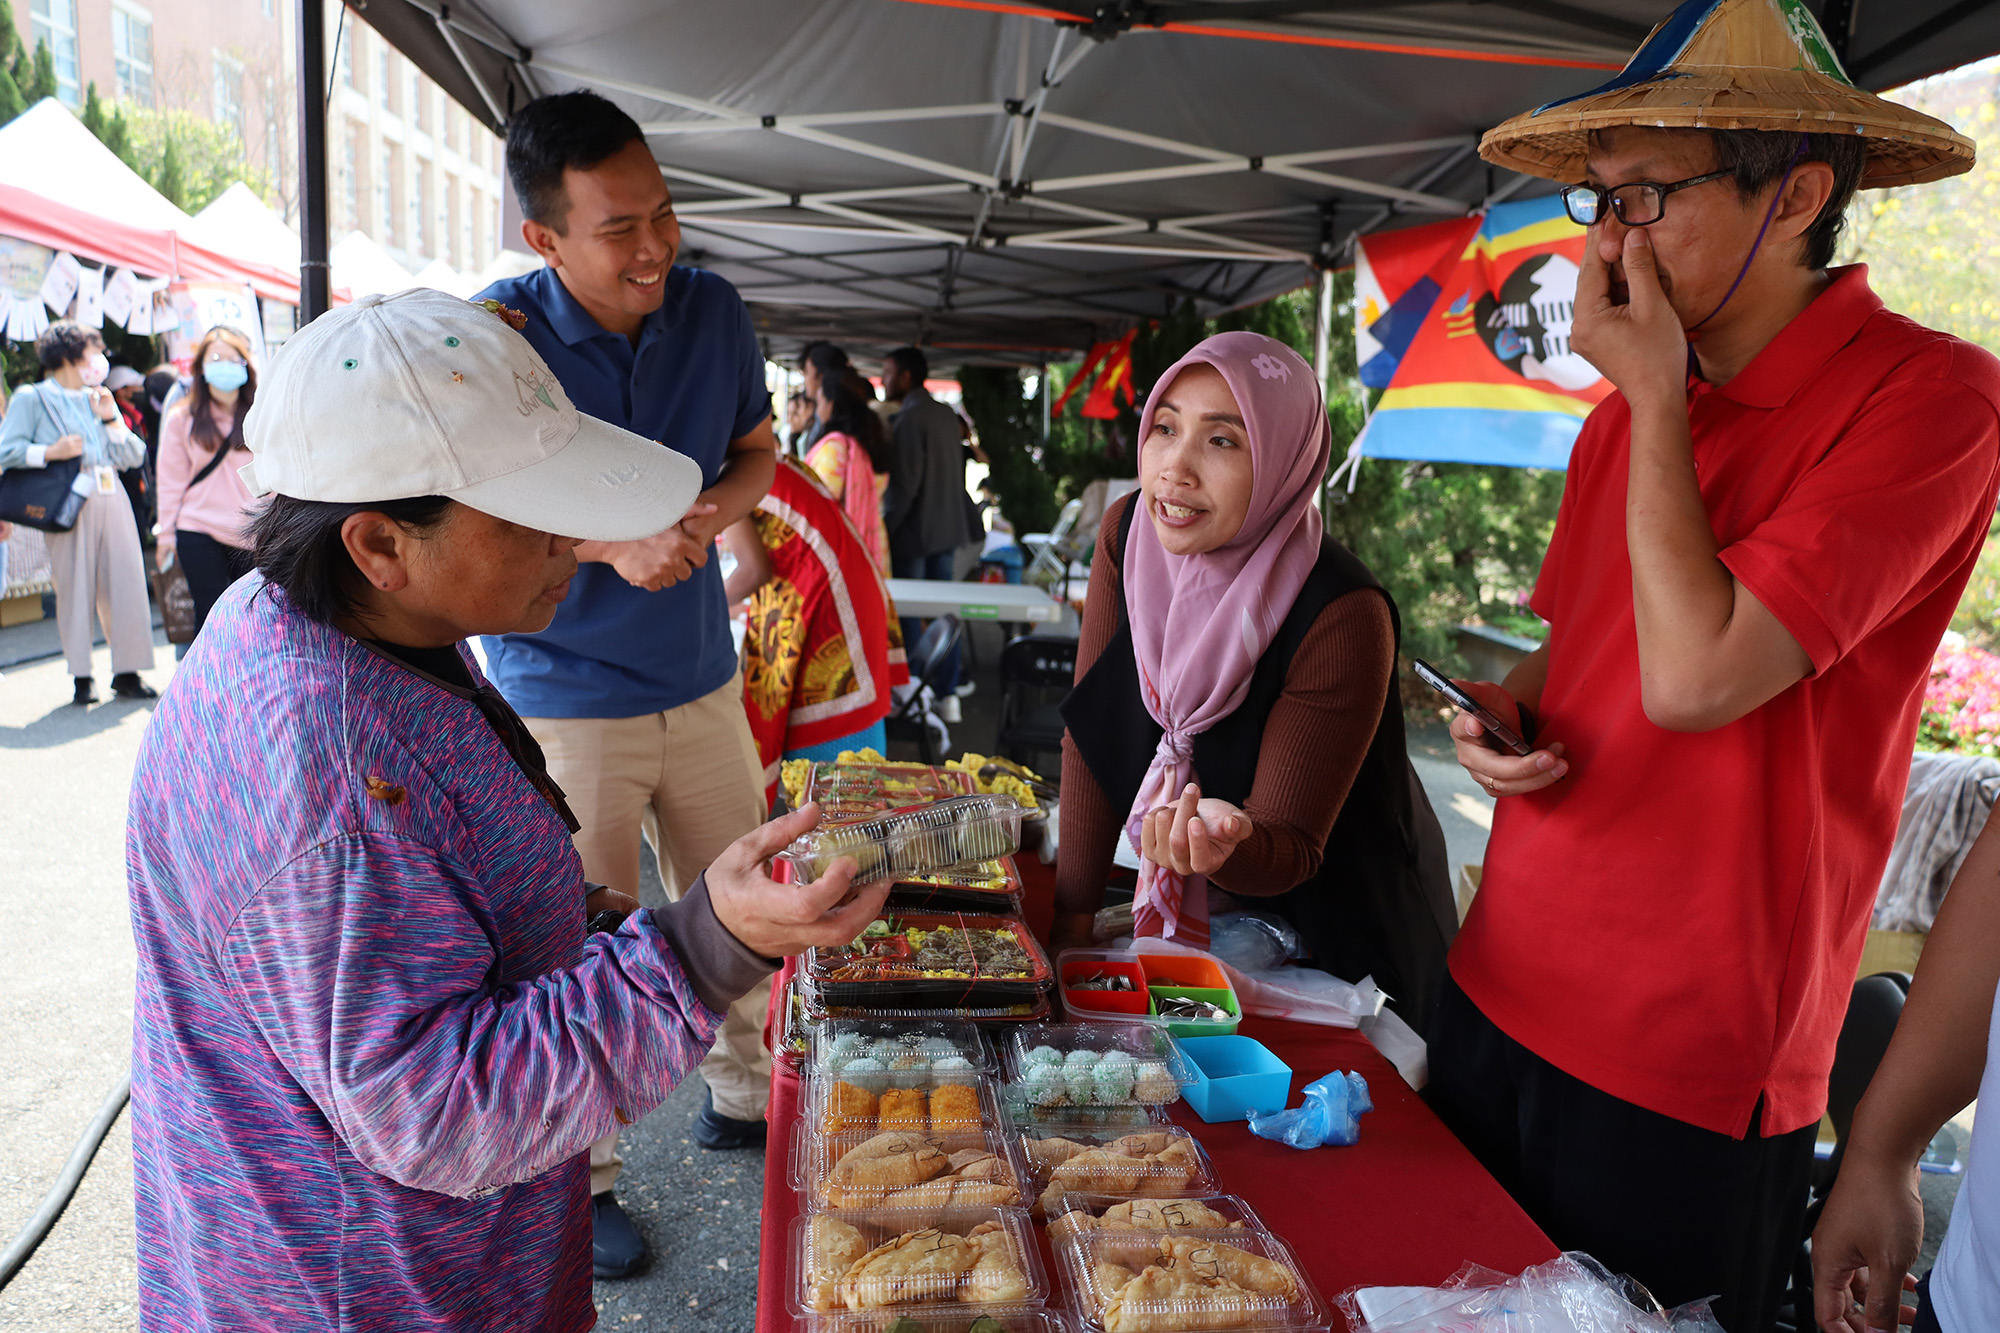 Asia University international students sold homemade hometown specialties, attracting much attention